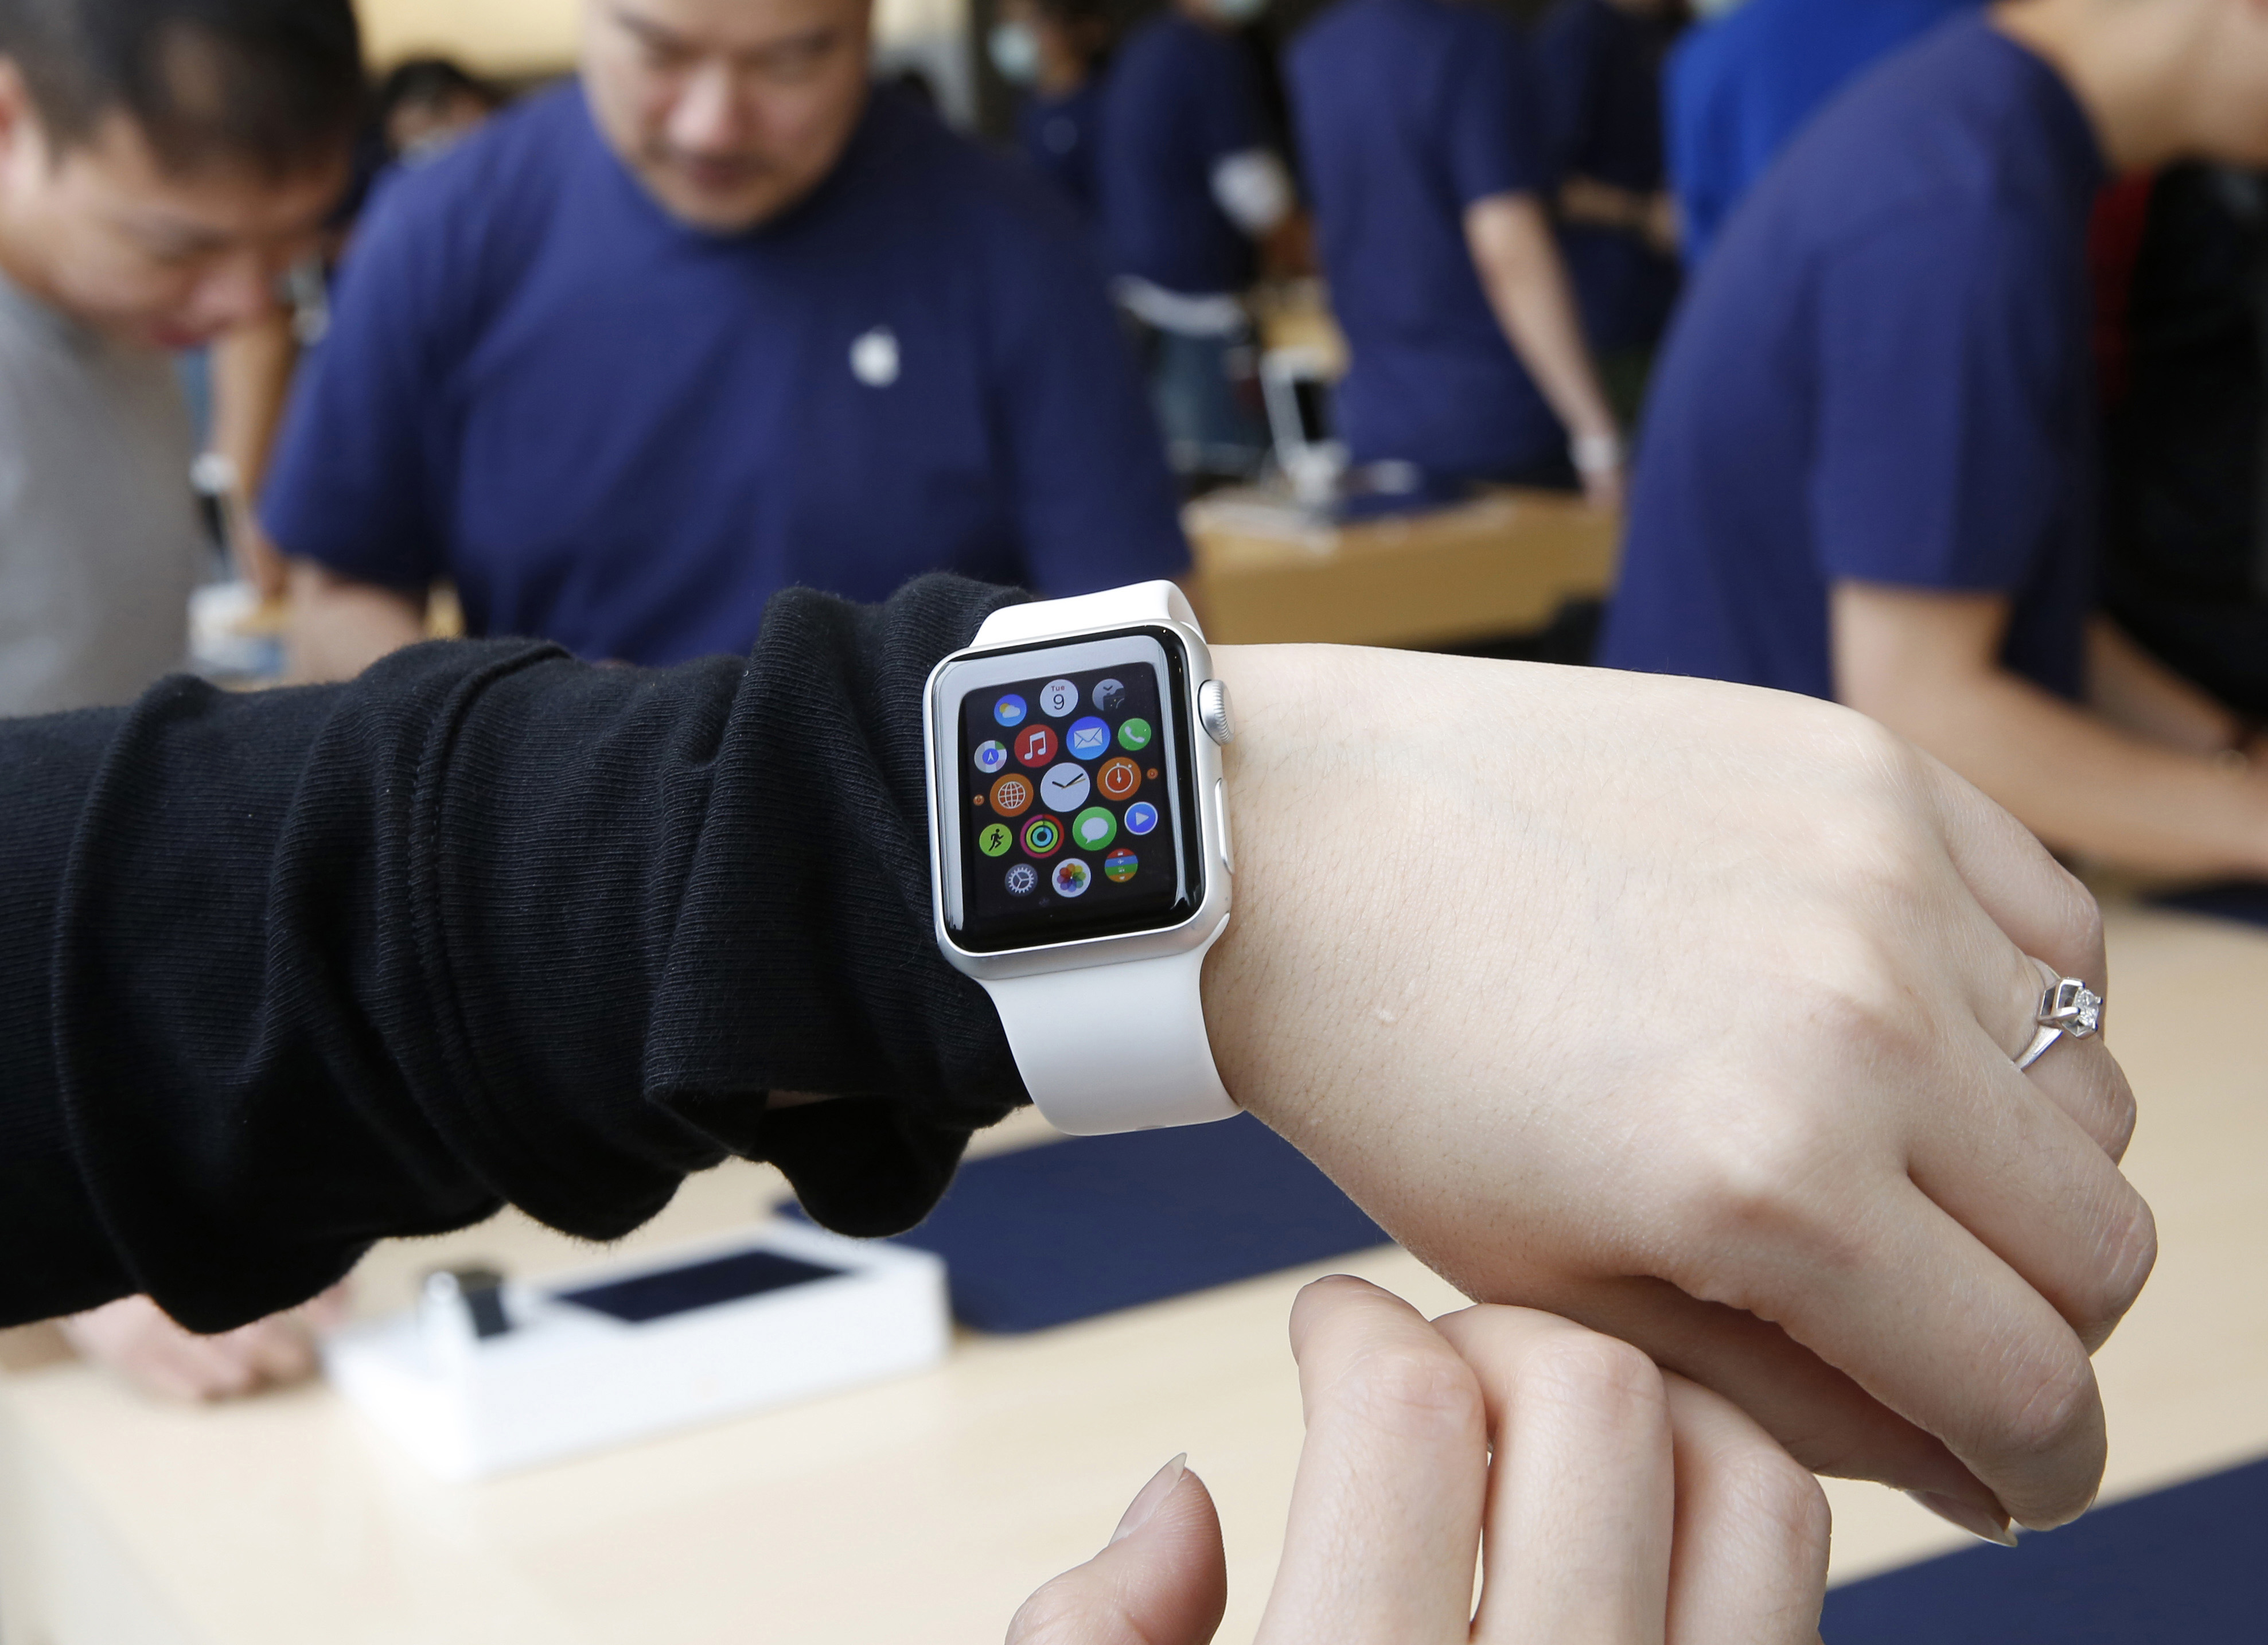 A customer tries on an Apple Watch at an Apple Store in Hong Kong  in April. Two months after Apple began taking online orders for its newest product, the company on Thursday said it will begin selling some models in its retail stores in two weeks. Apple also says it's cutting through a backlog of online orders, with most watches ordered by the end of May shipping within two weeks. | AP